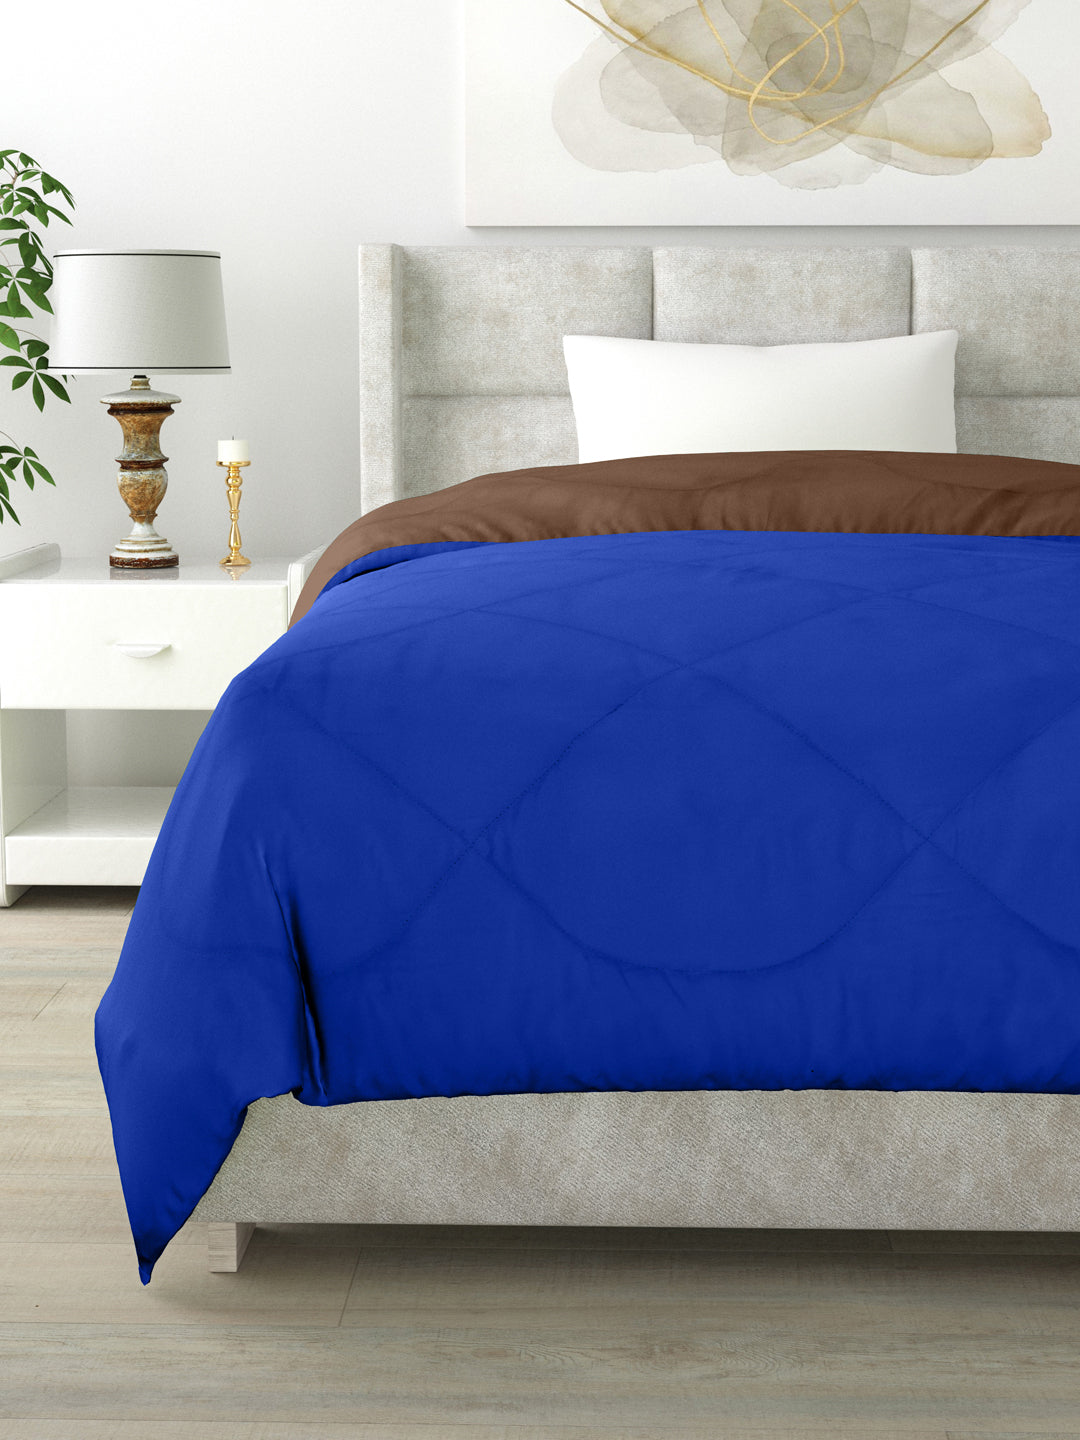 Reversible Single Bed Comforter 200 GSM 60x90 Inches (Brown & Blue)